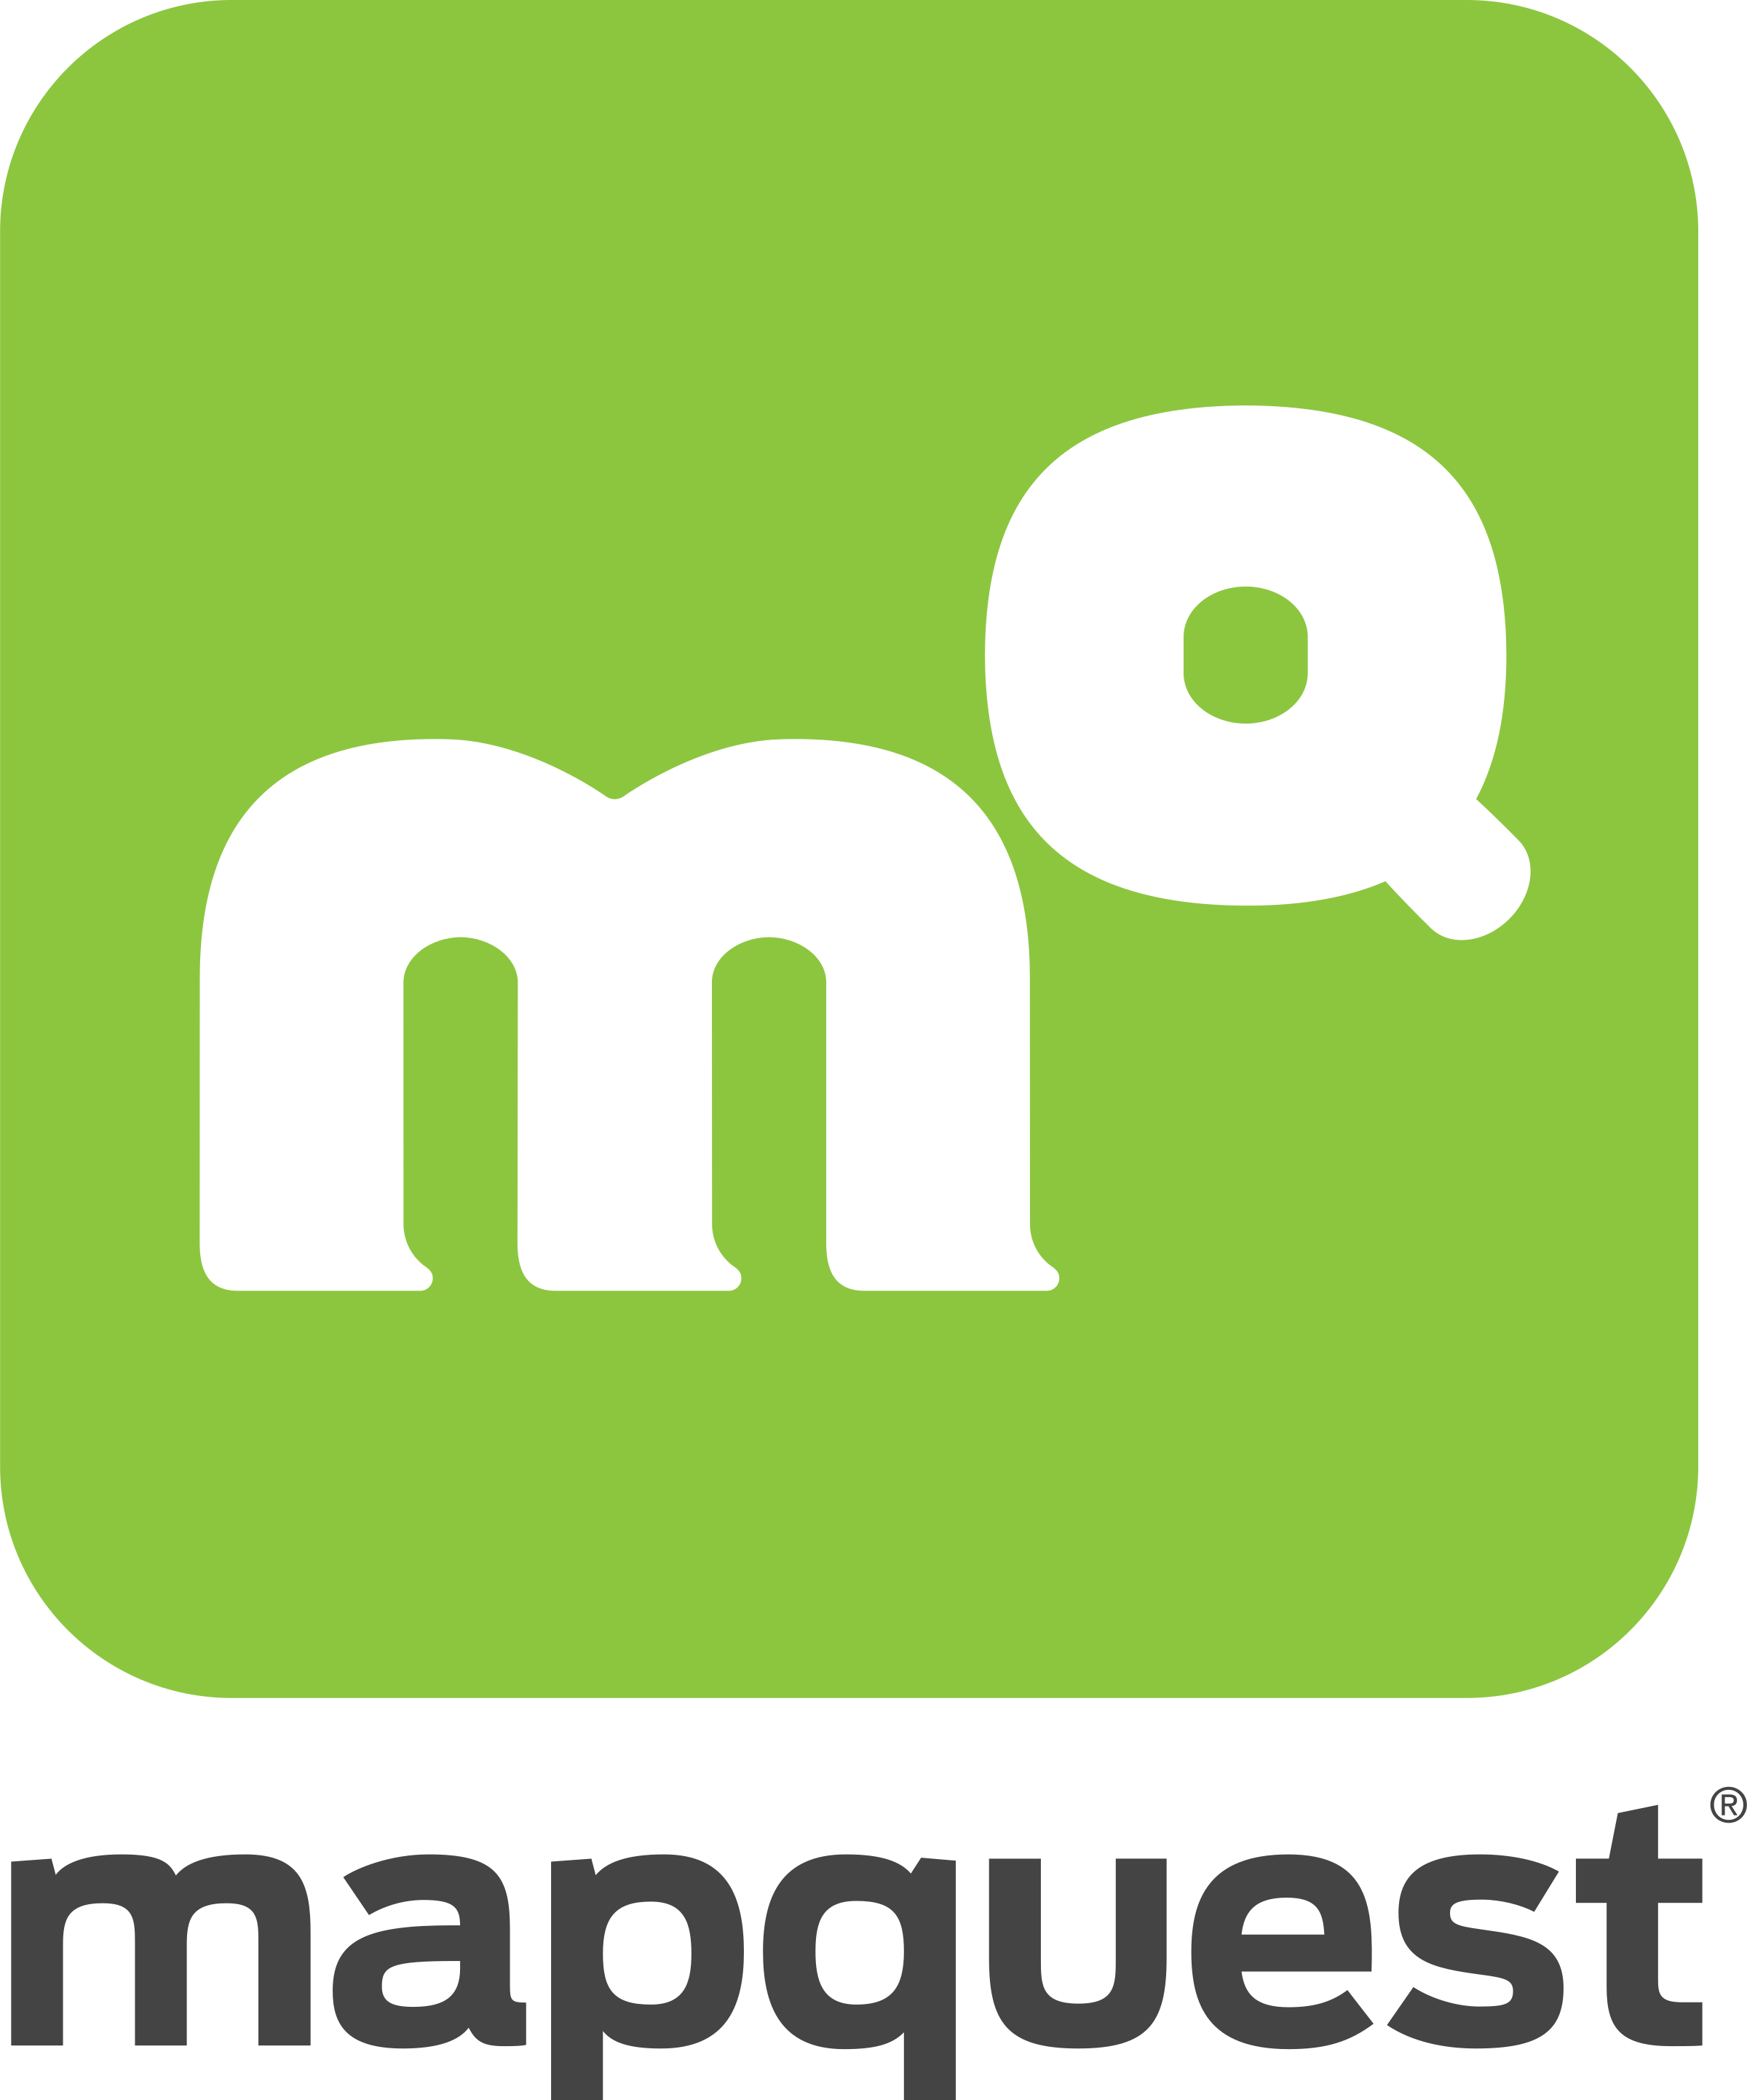 get the most out of your virtual office - mapquest-3-logo-png-transparent